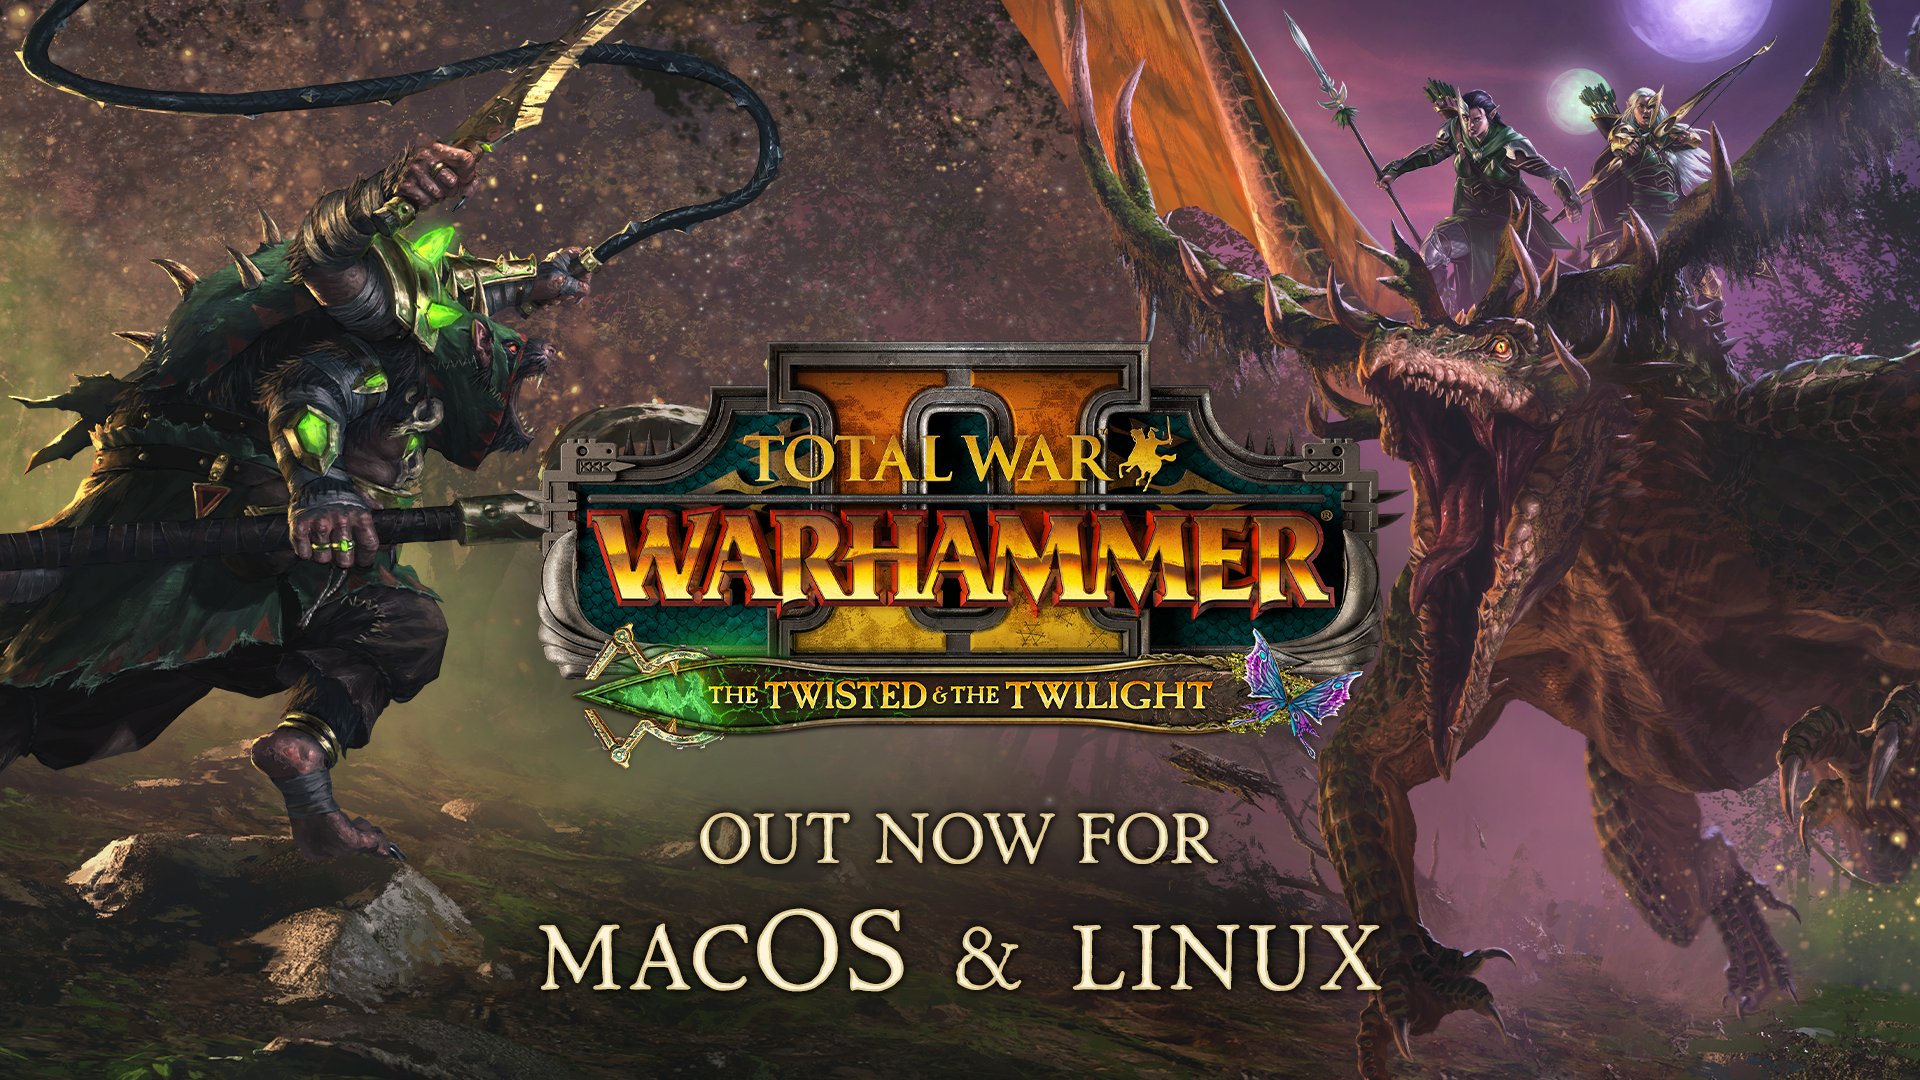 Total War: WARHAMMER II – The Twisted & The Twilight DLC Is Out Now for Linux